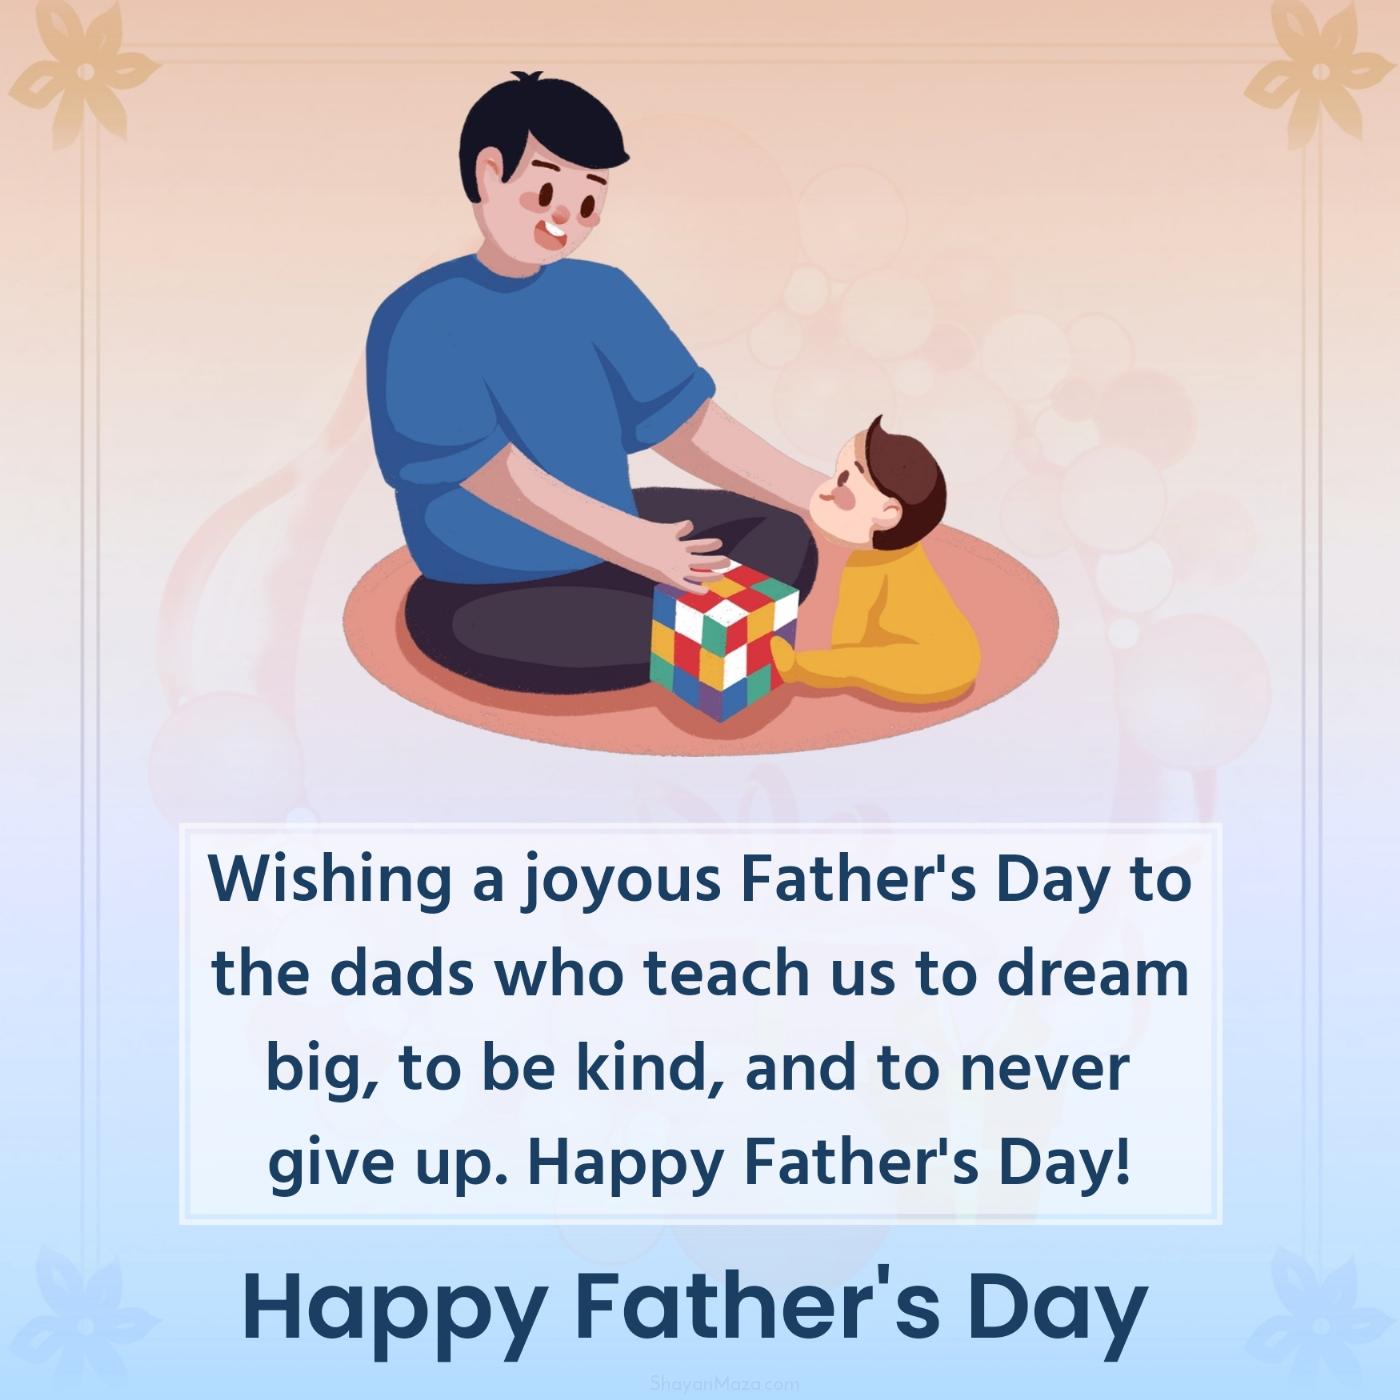 Wishing a joyous Father's Day to the dads who teach us to dream big